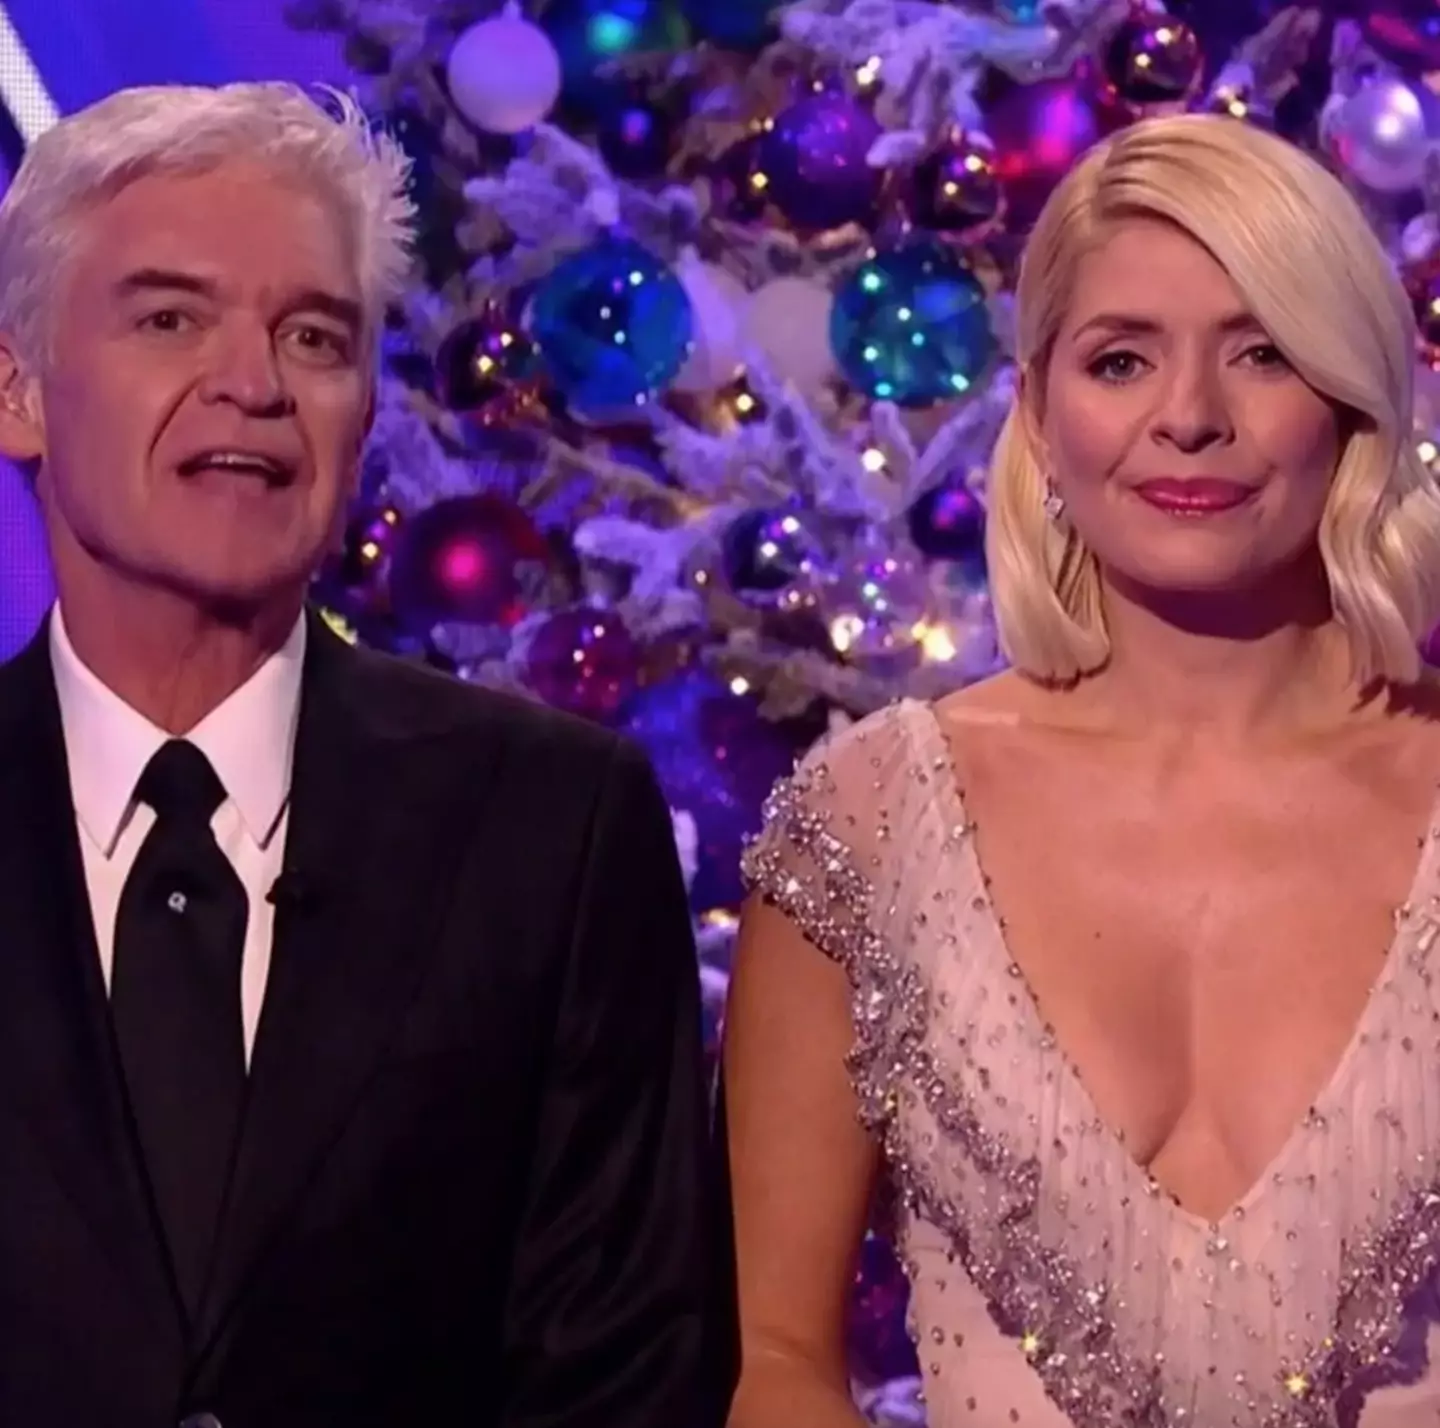 Holly will be presenting Dancing On Ice with Stephen Mulhern next month.